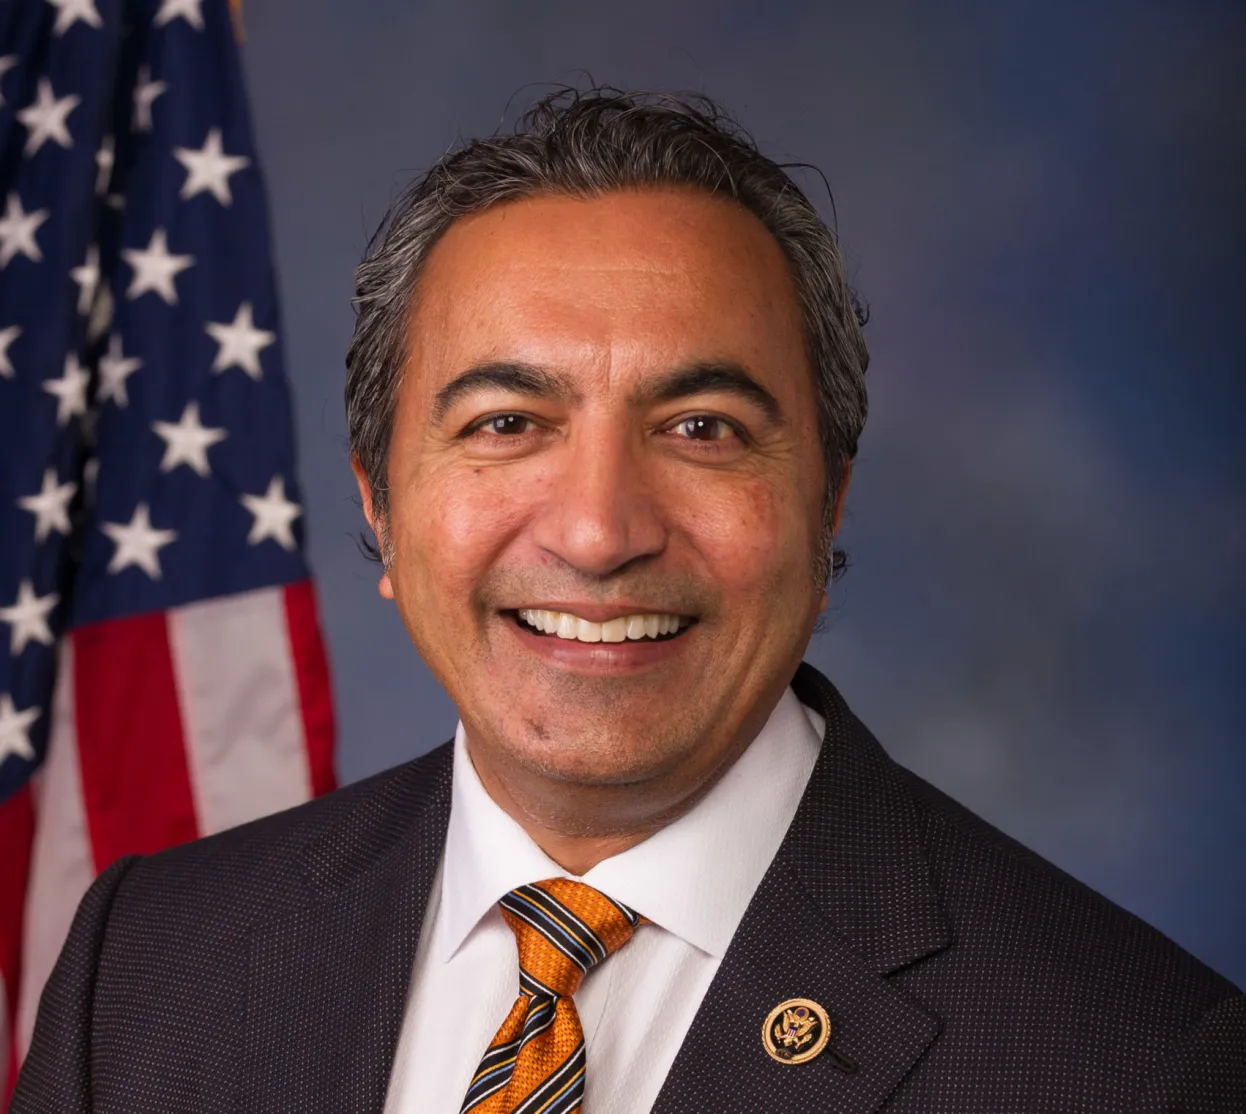 Meeting with Rep. Ami Bera (D-CA) on US healthcare policy